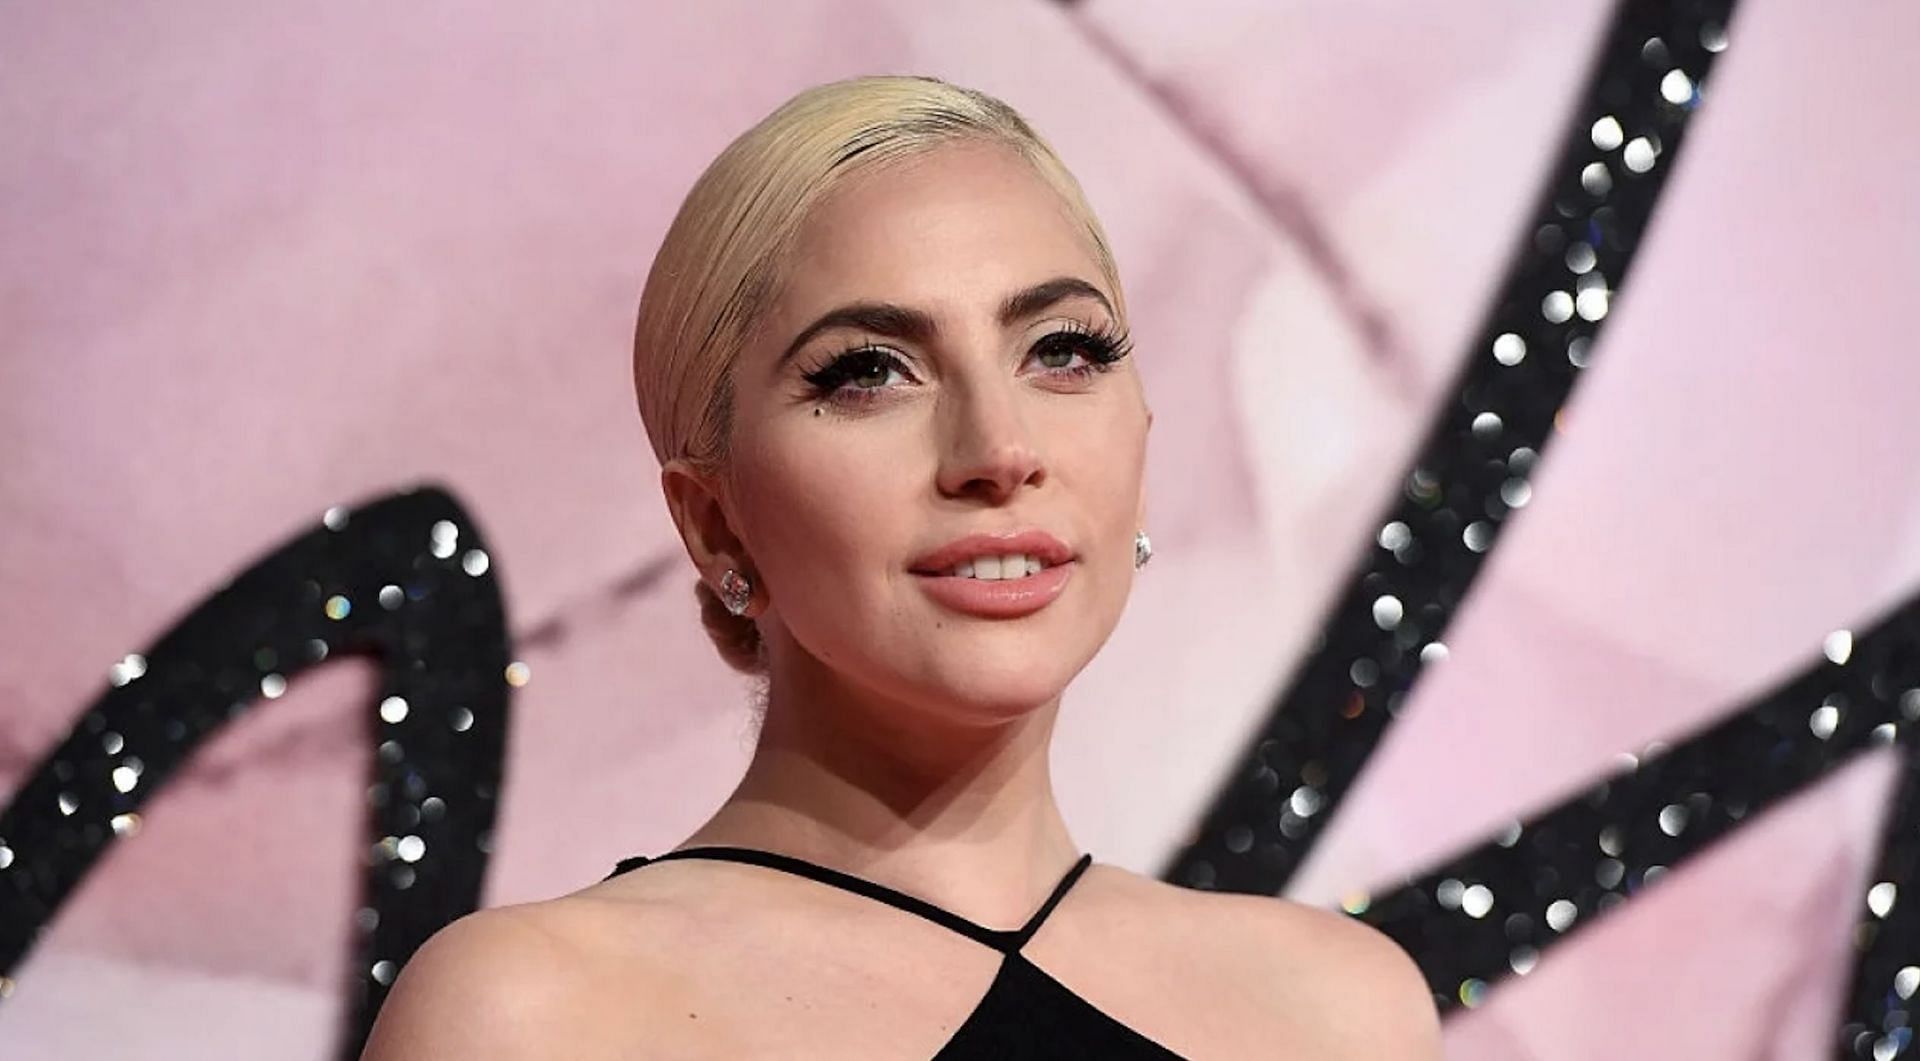 Fans can&#039;t wait to see Lady Gaga&#039;s take on the iconic character and what surprises are in store for this highly-anticipated film (Image via Getty)